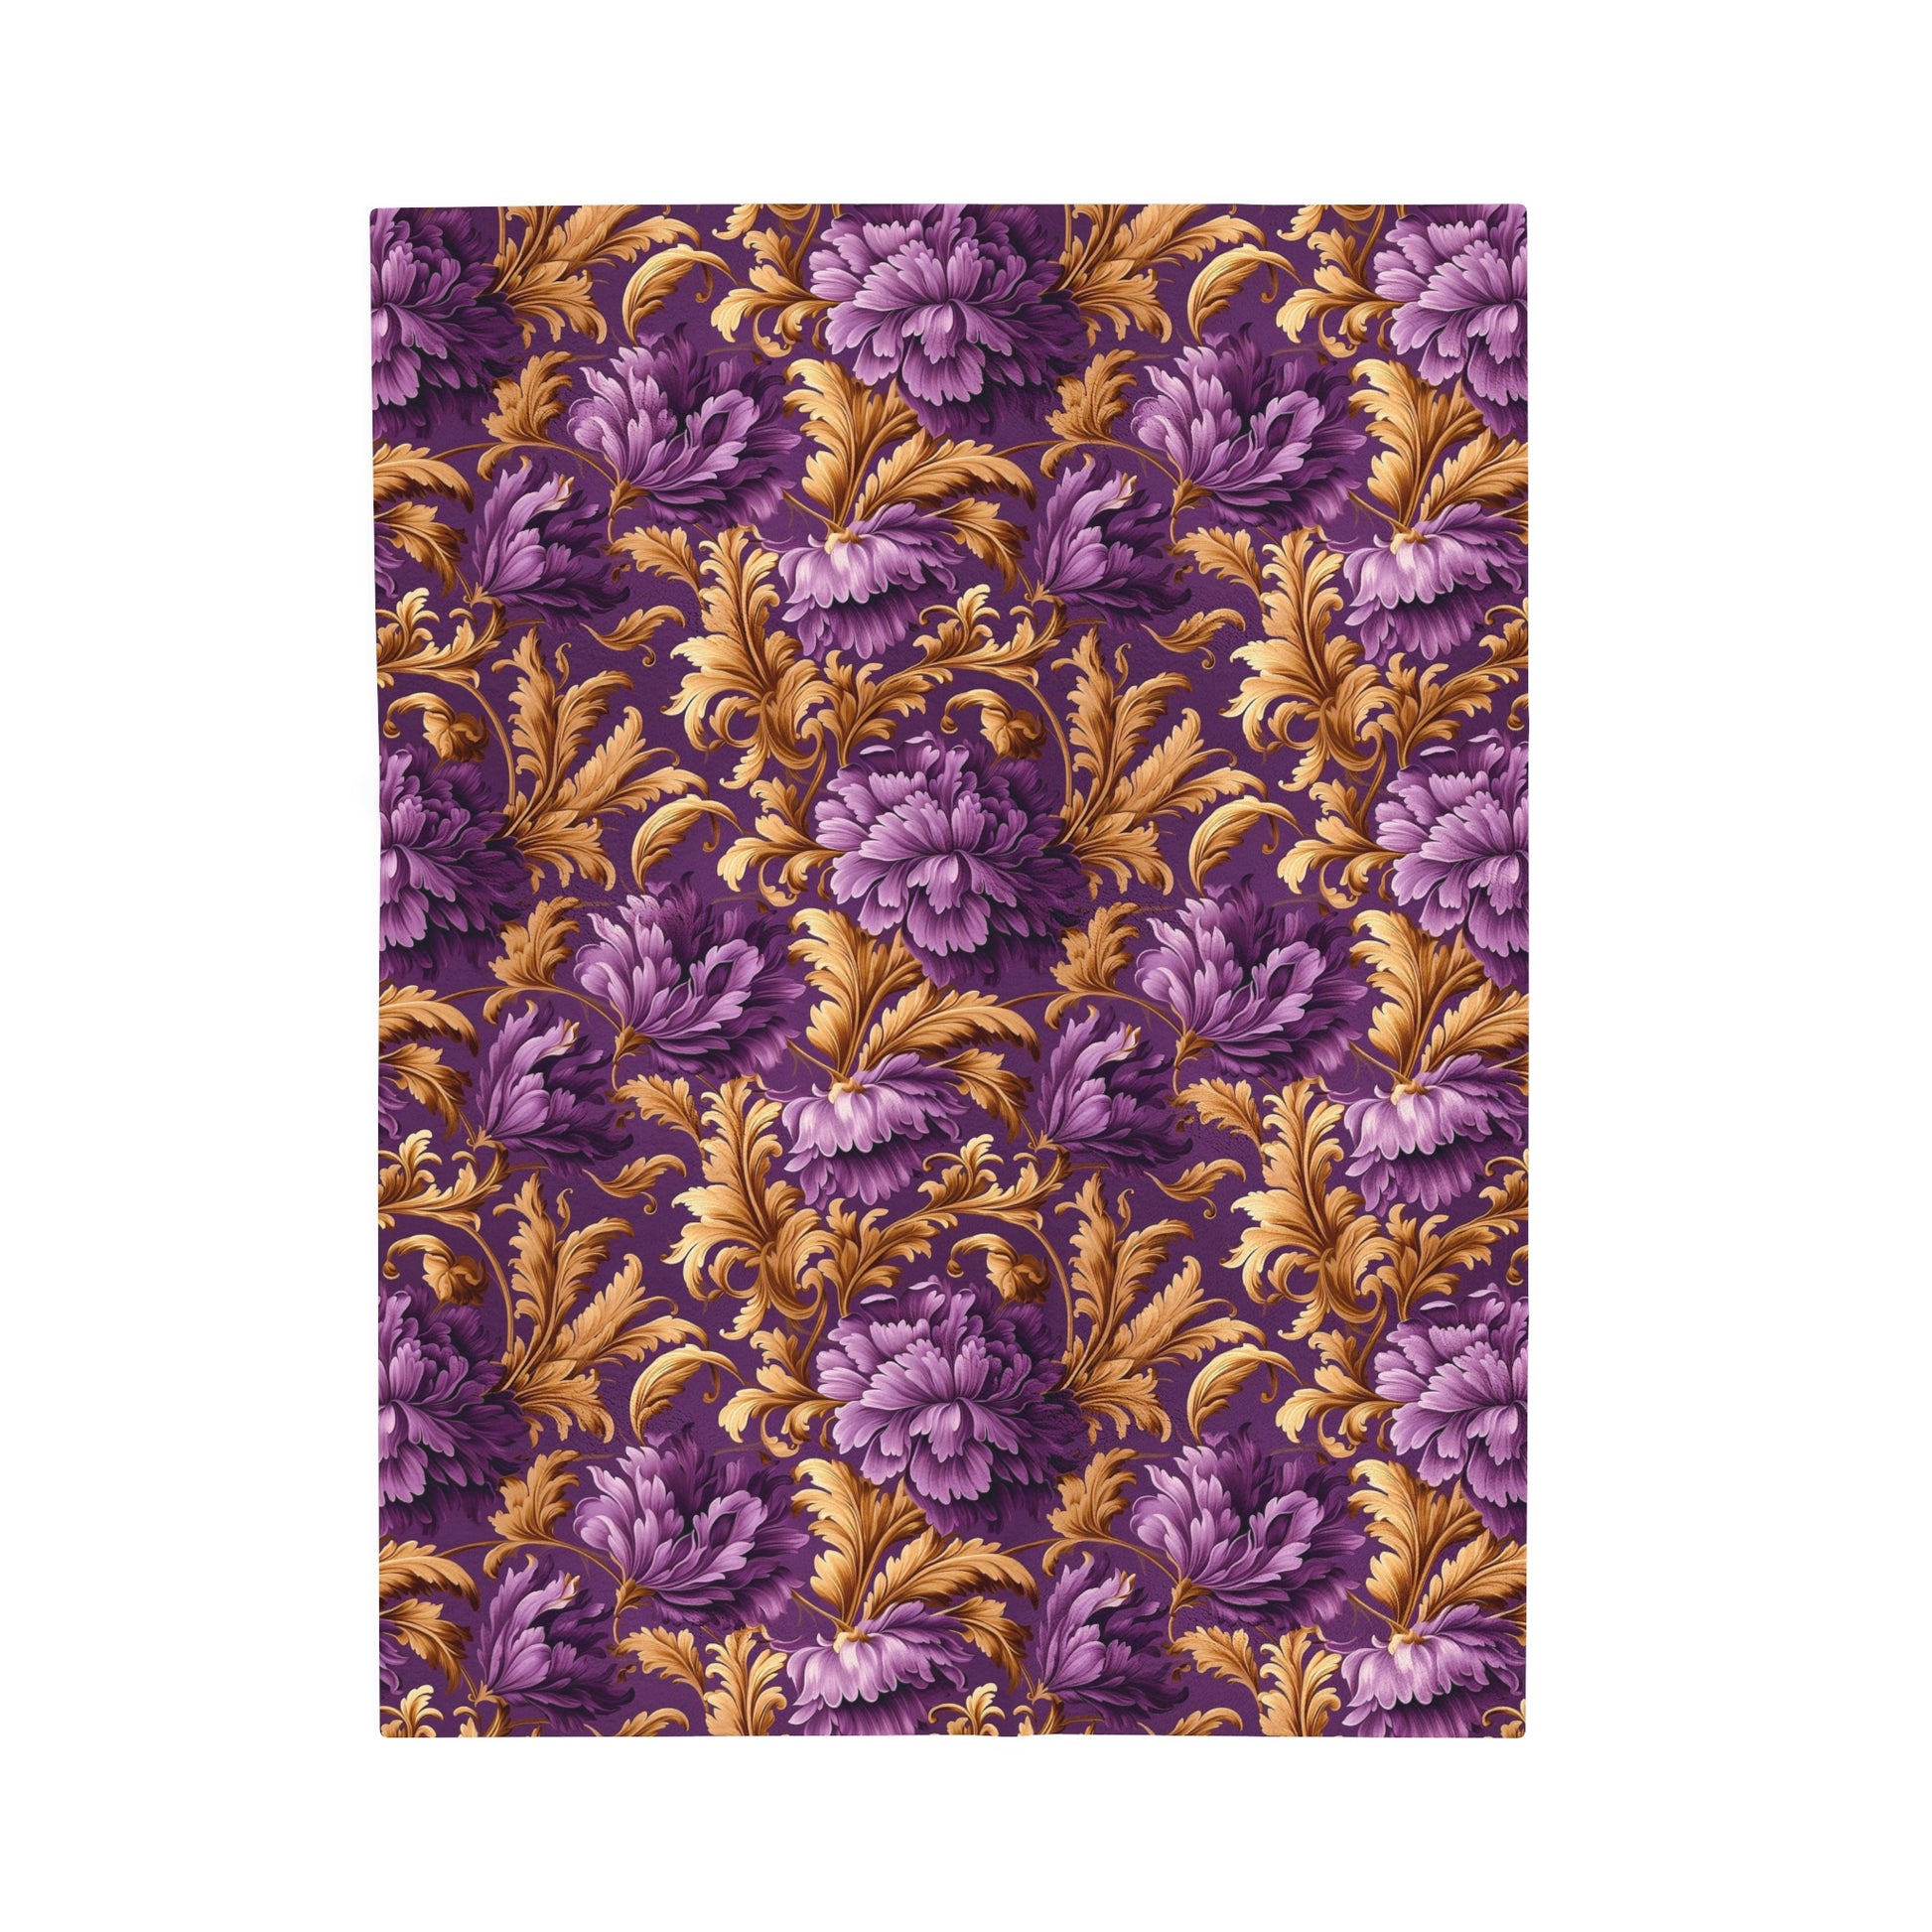 Velveteen Plush Blanket | Gold and Purple Flowers | Sophisticated Throw Blanket from The Curated Goose